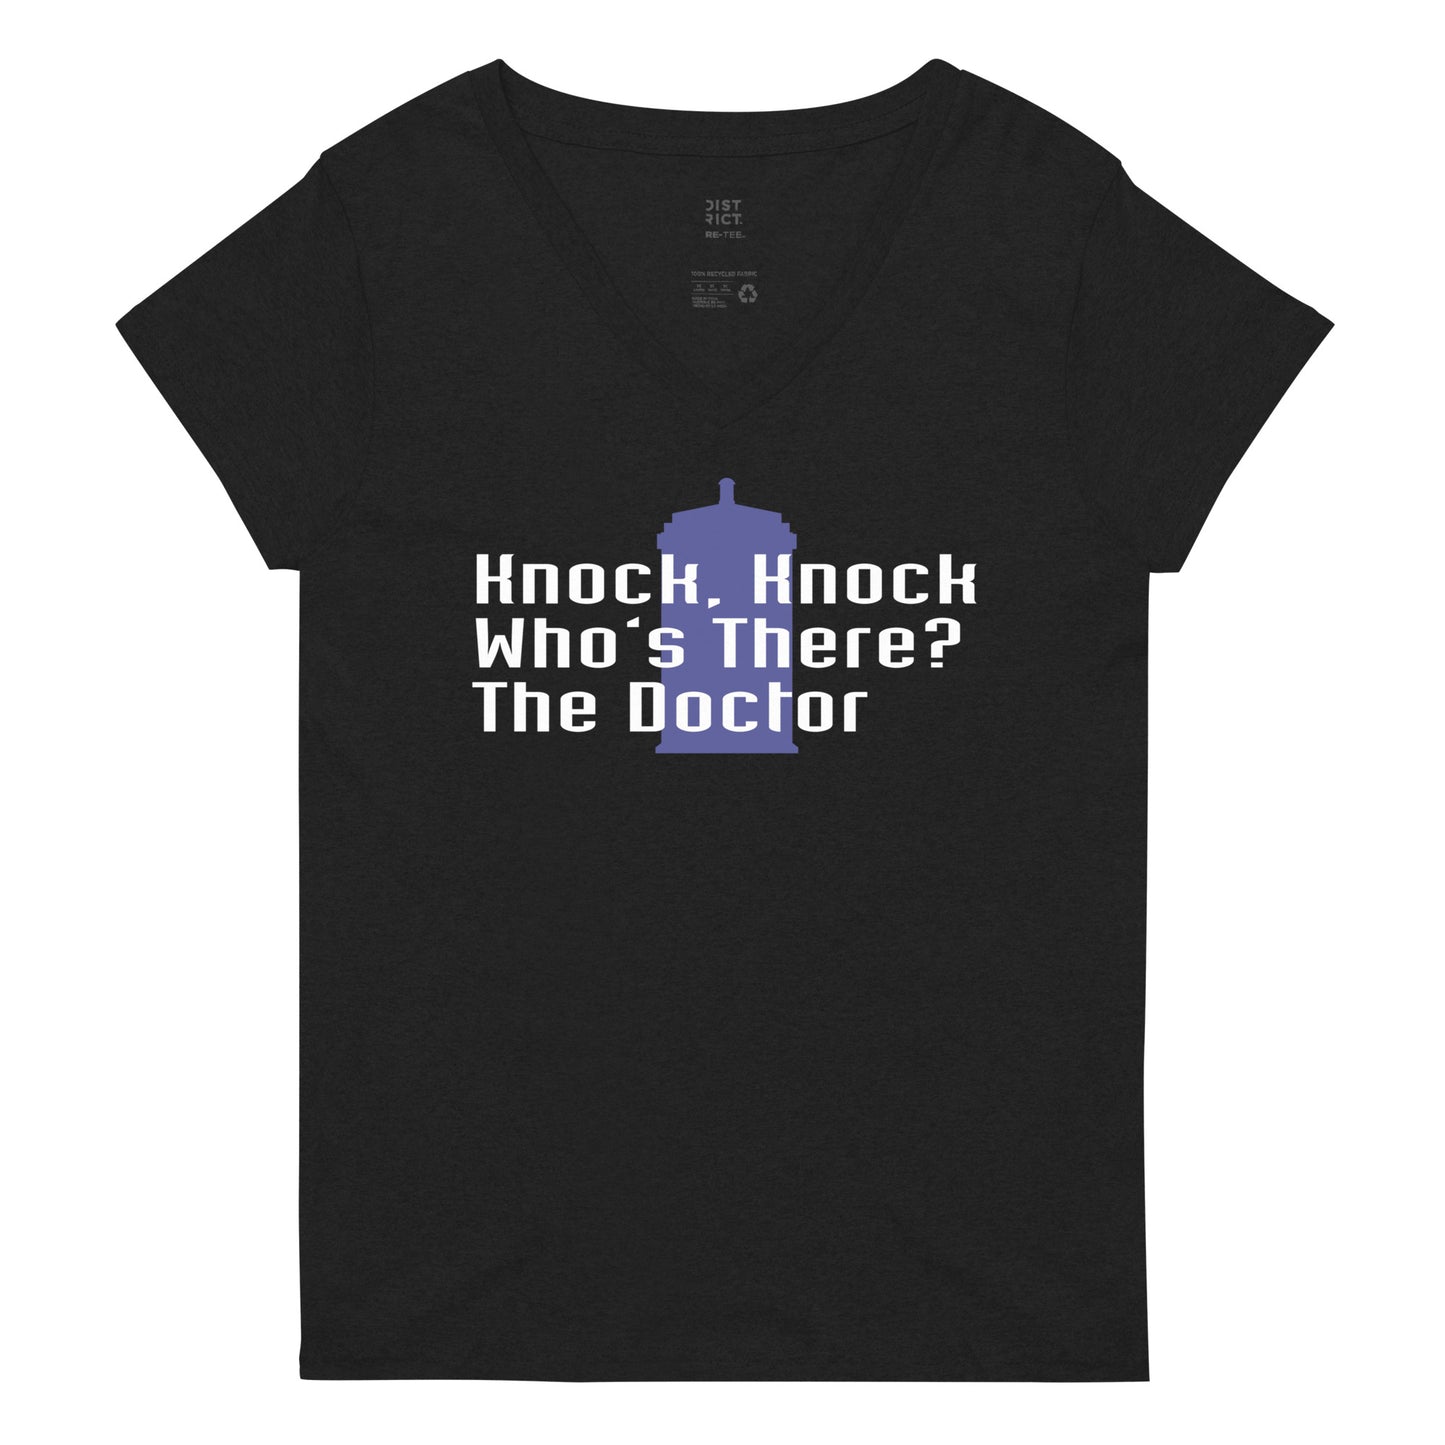 Knock Knock! Who's There? The Doctor Women's V-Neck Tee